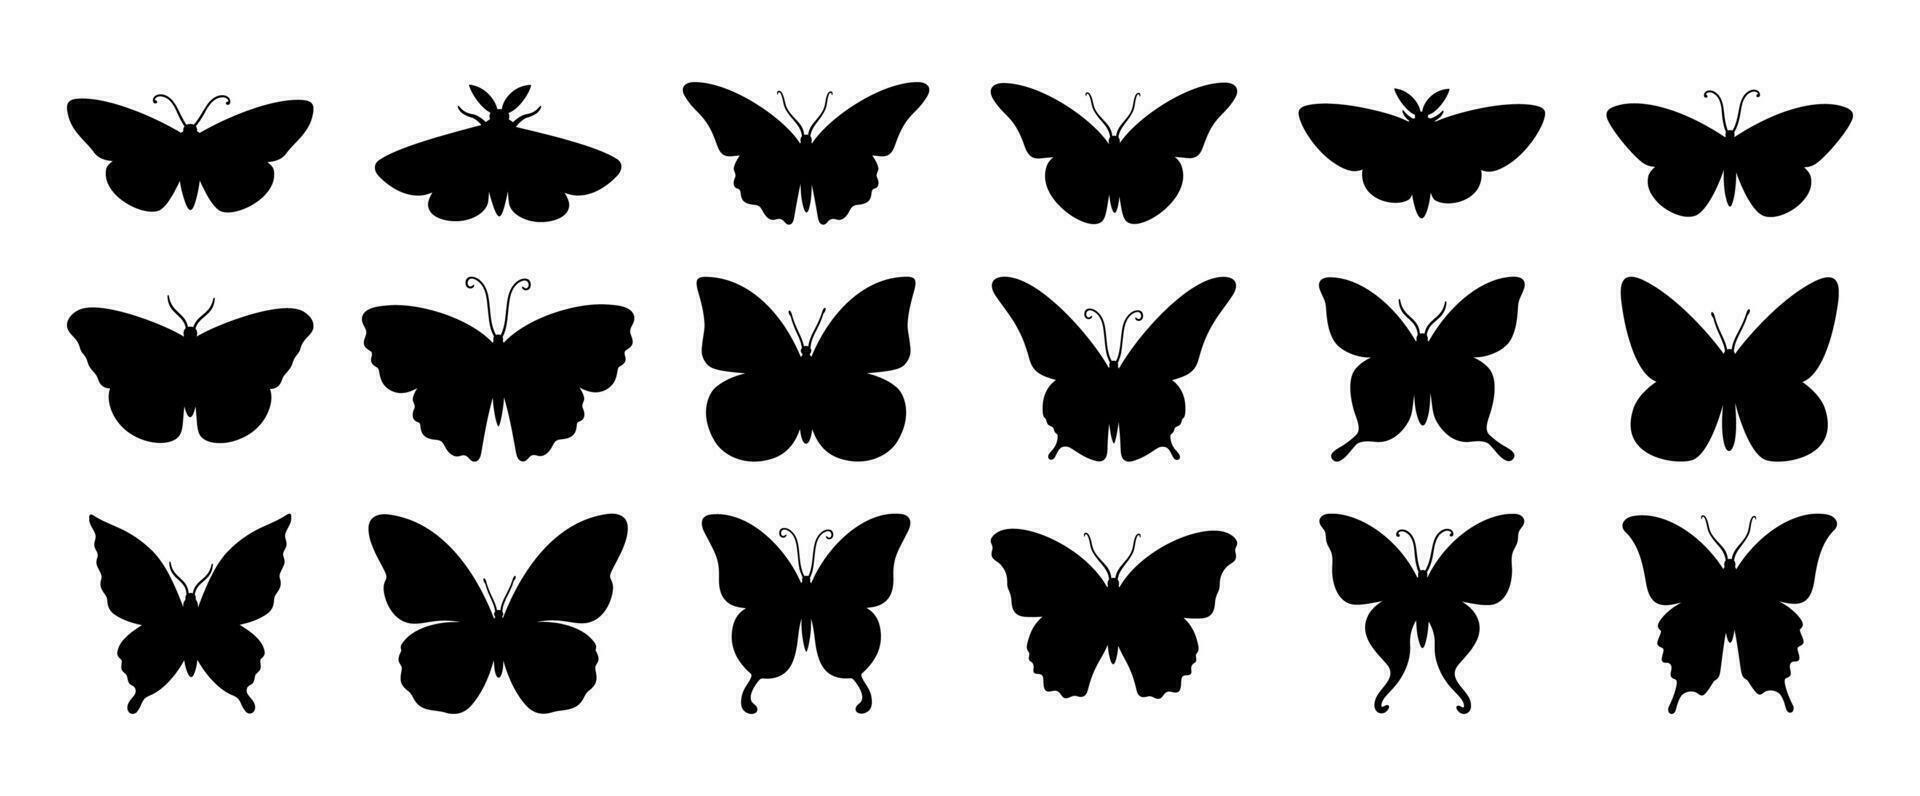 Butterfly silhouettes. Cute butterfly stencils summer insects with wings, flying butterflies. Winged exotic various moth decorative simple vector isolated set